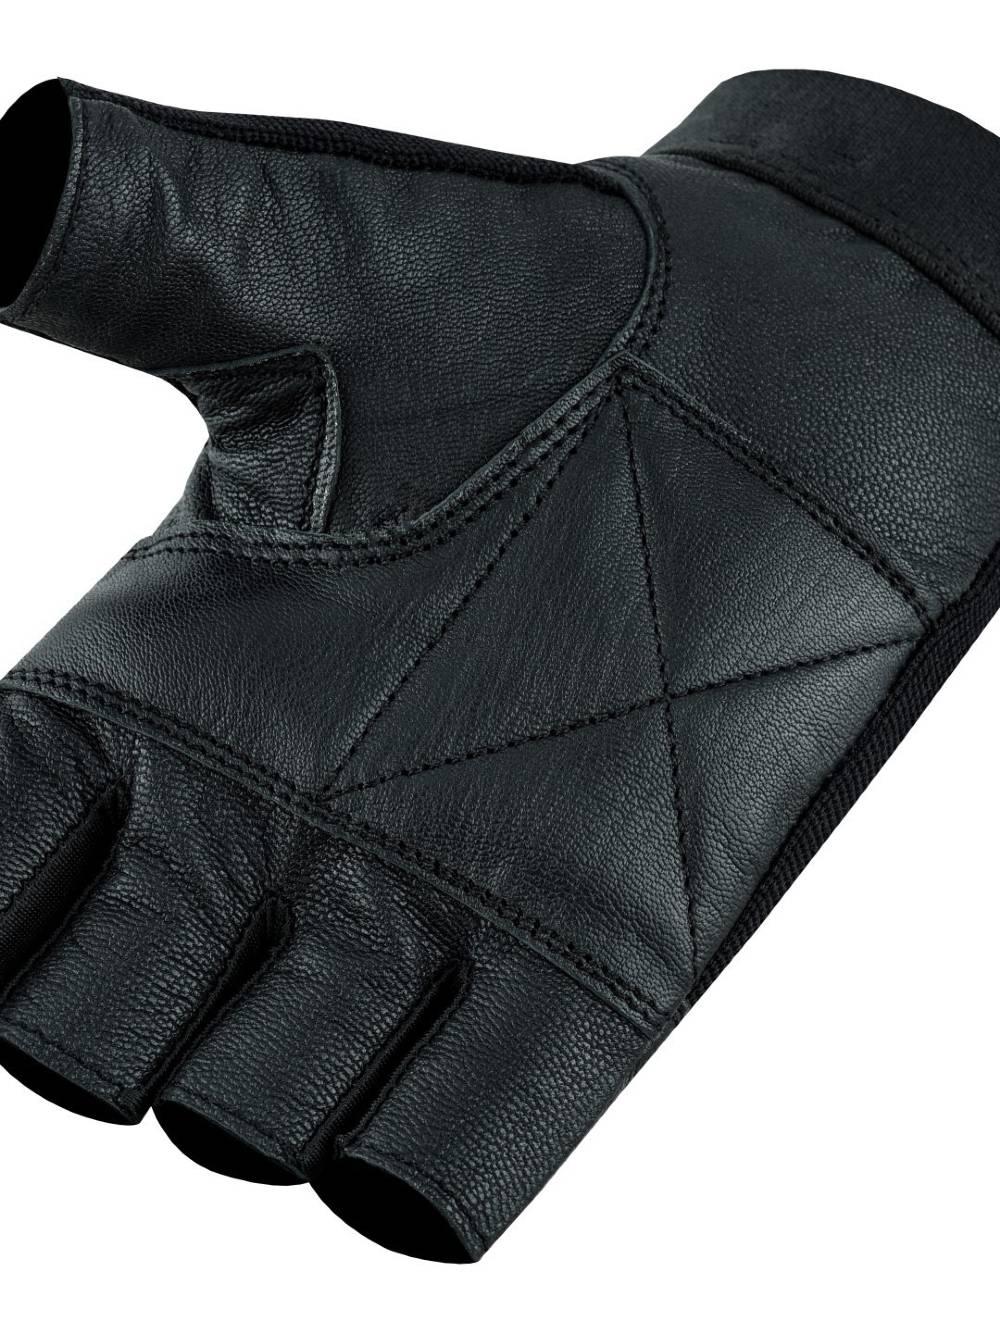 Gym, Cycling Padded leather gloves workout fitness weight lifting Stylish  Men and Women Half finger